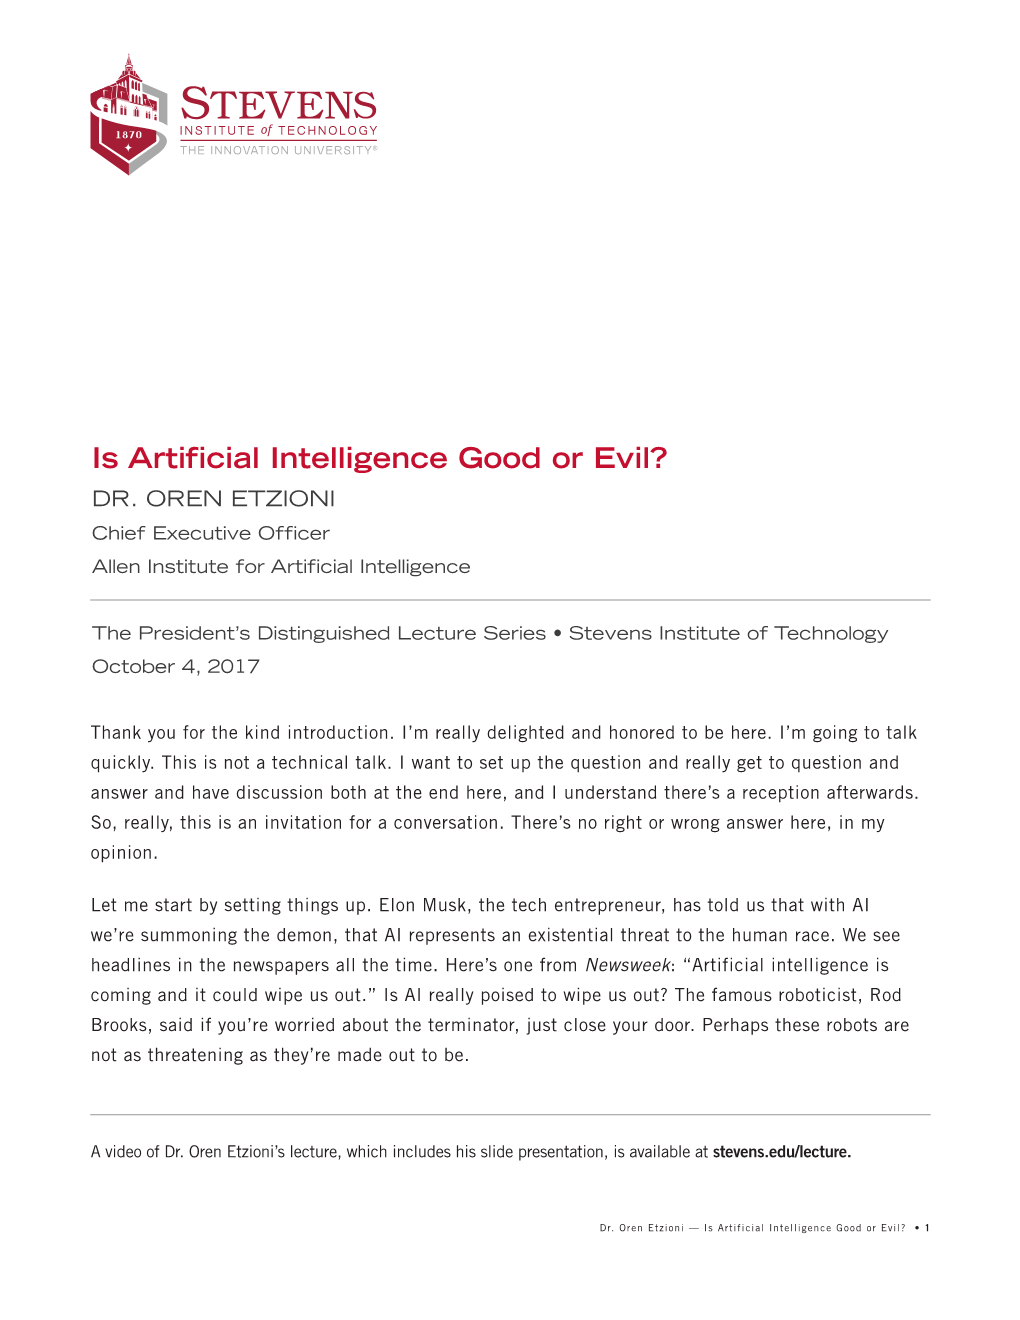 Is Artificial Intelligence Good Or Evil? DR